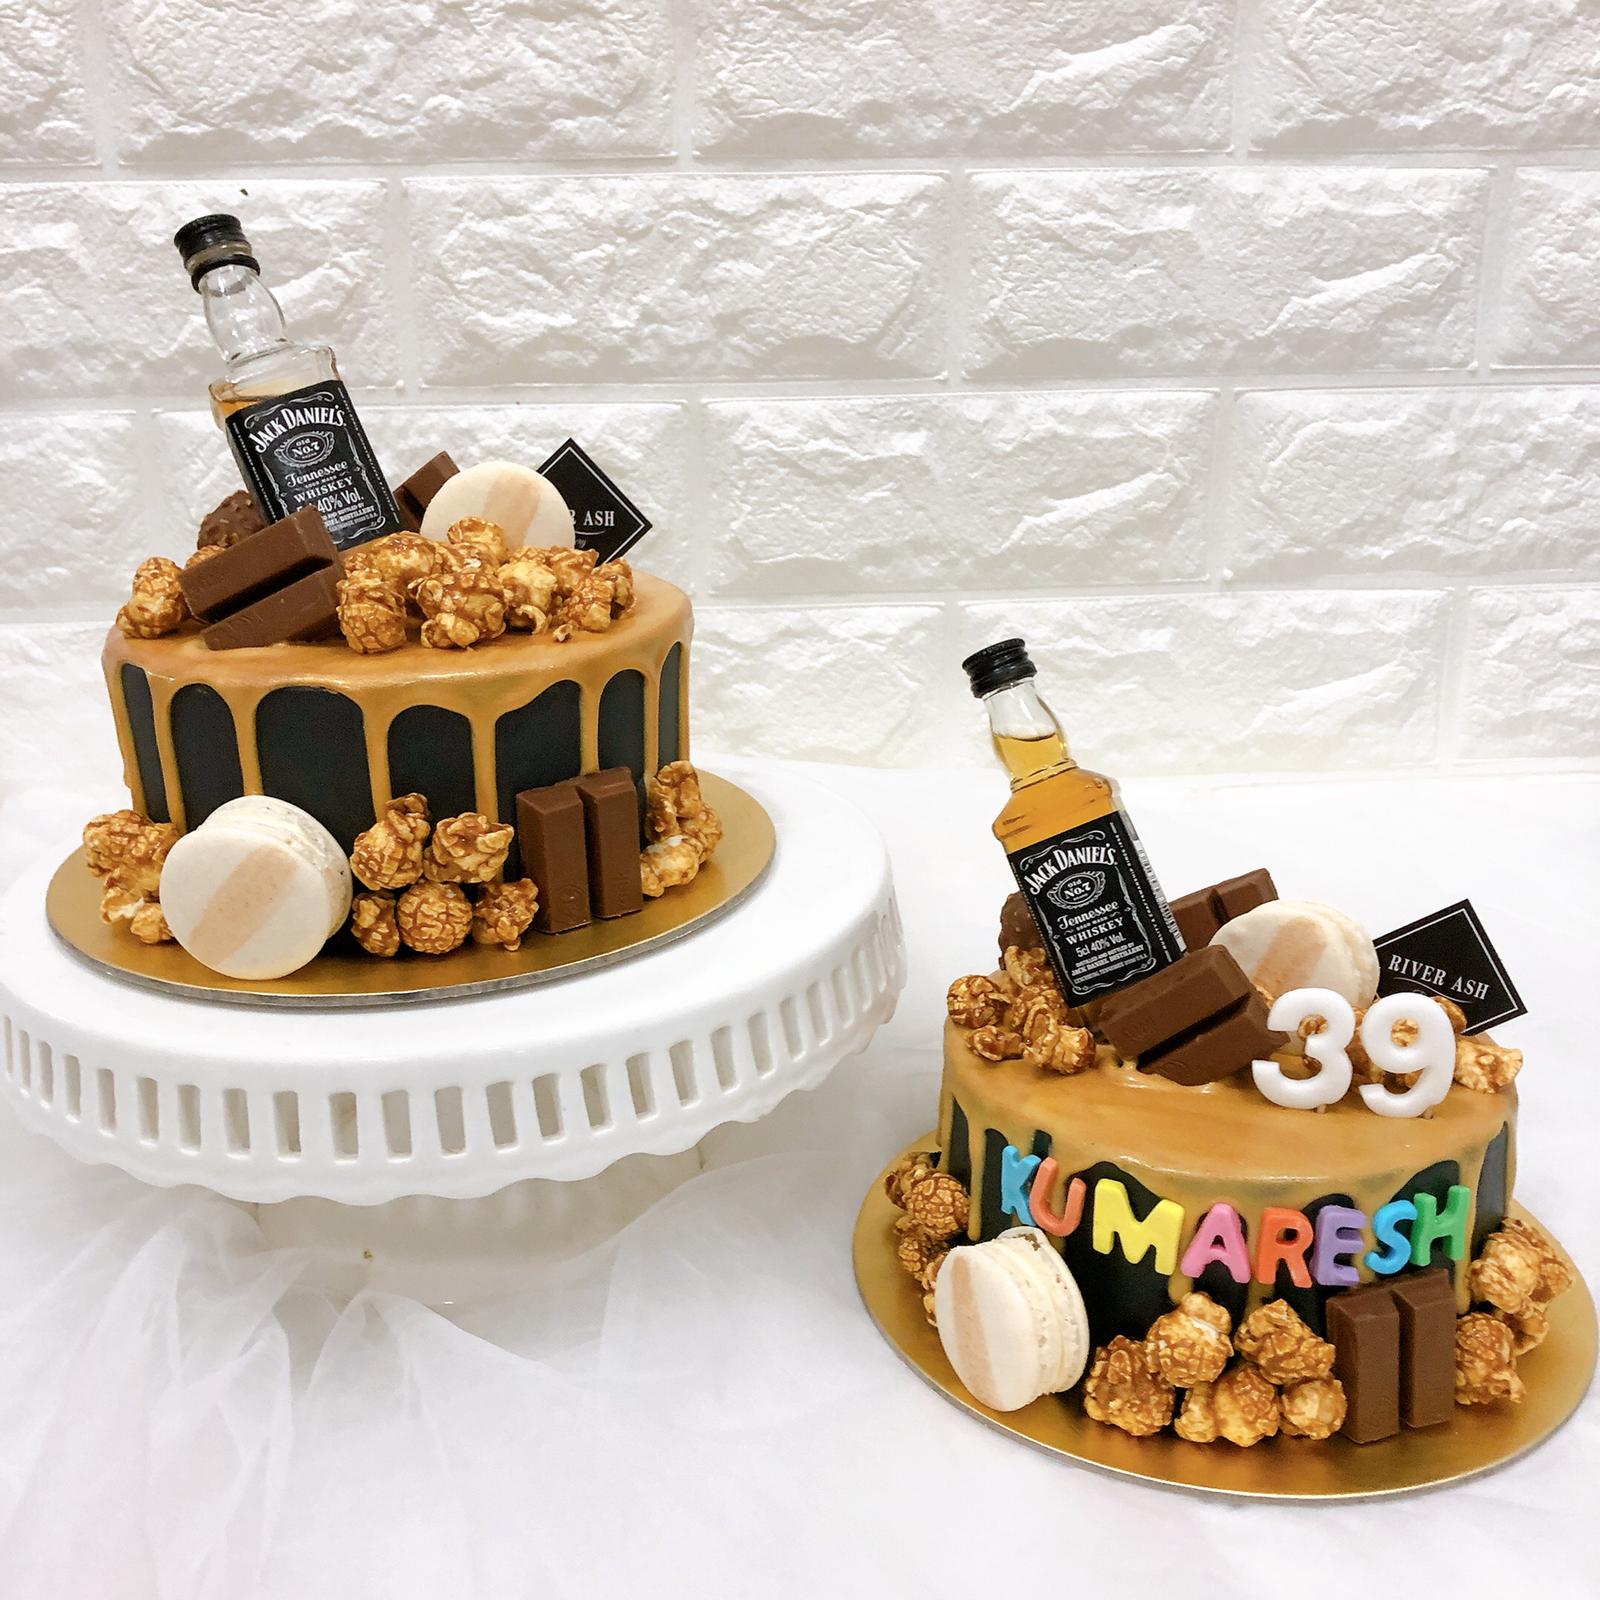 The_minion_chef cake by Sonali Mali - Whisky/beer bottle cake Flavor:  chocolate ... Follow:@the_minion_chef Follow:@malisrecipe  Follow:@_mali_sonali_ ... #whiskybottlecake #cakeforwhiskylover  #beerbottlecake #chocolatecake #cakeforboys #cakelove ...